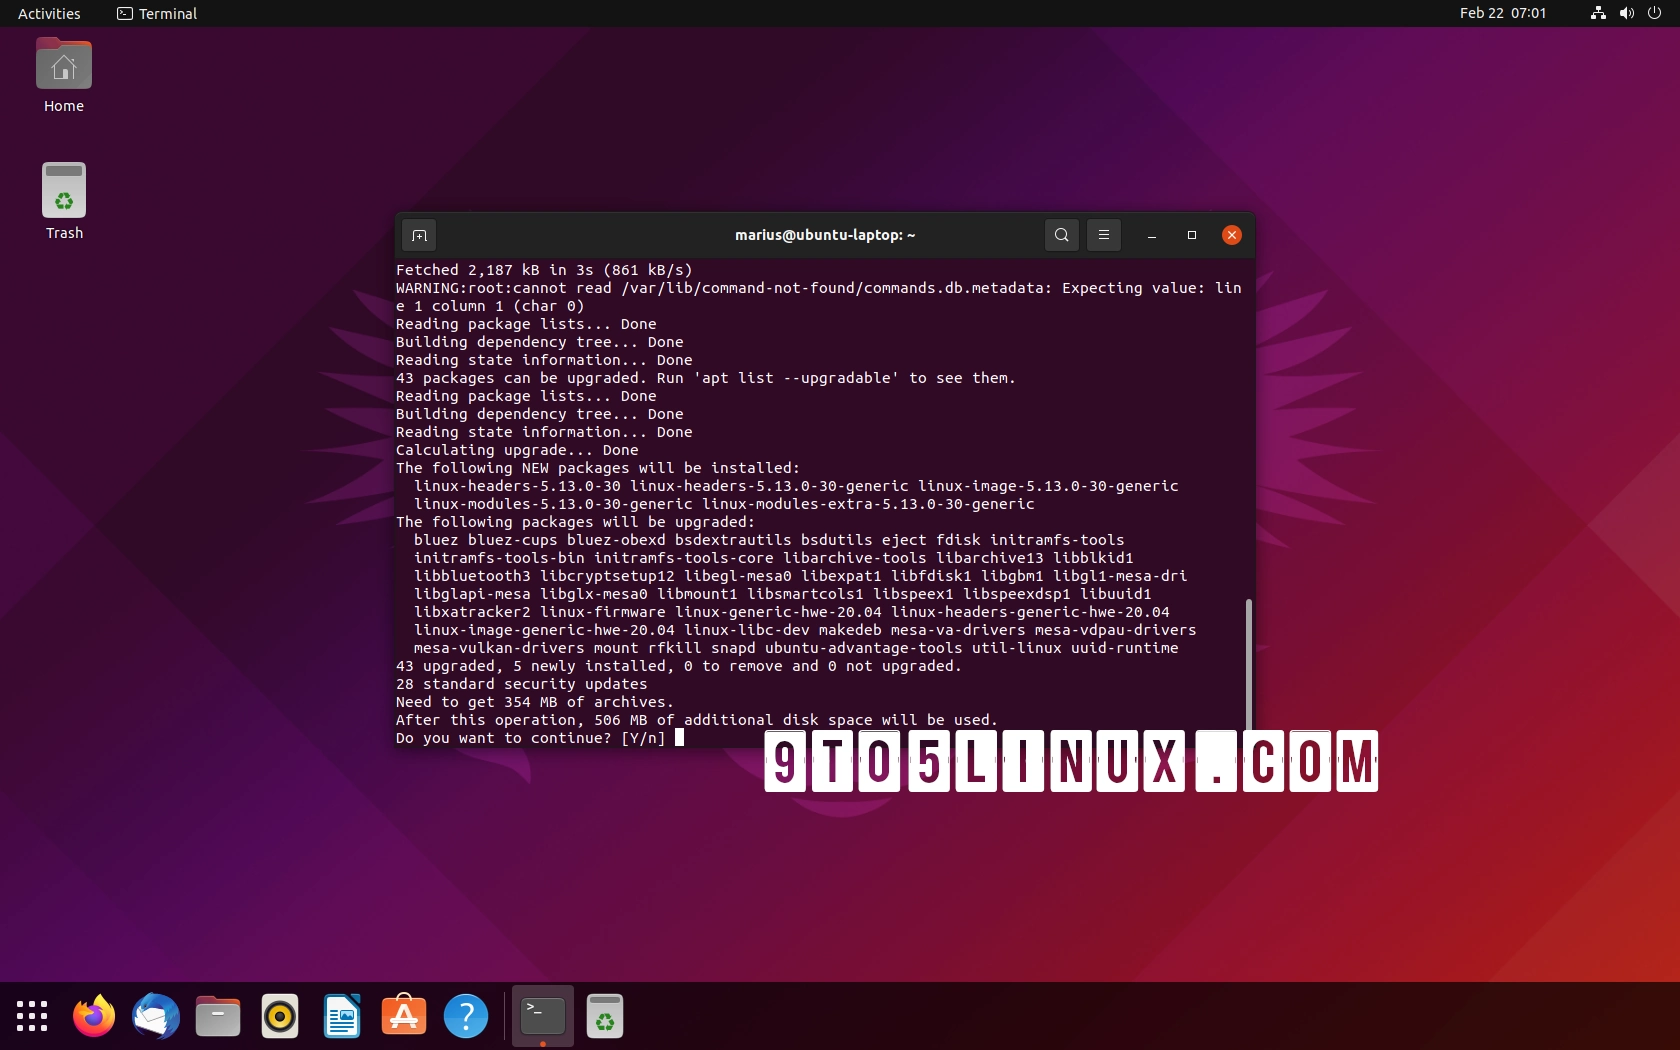 Ubuntu Users Get Another Major Kernel Update, Up to 15 Vulnerabilities Patched